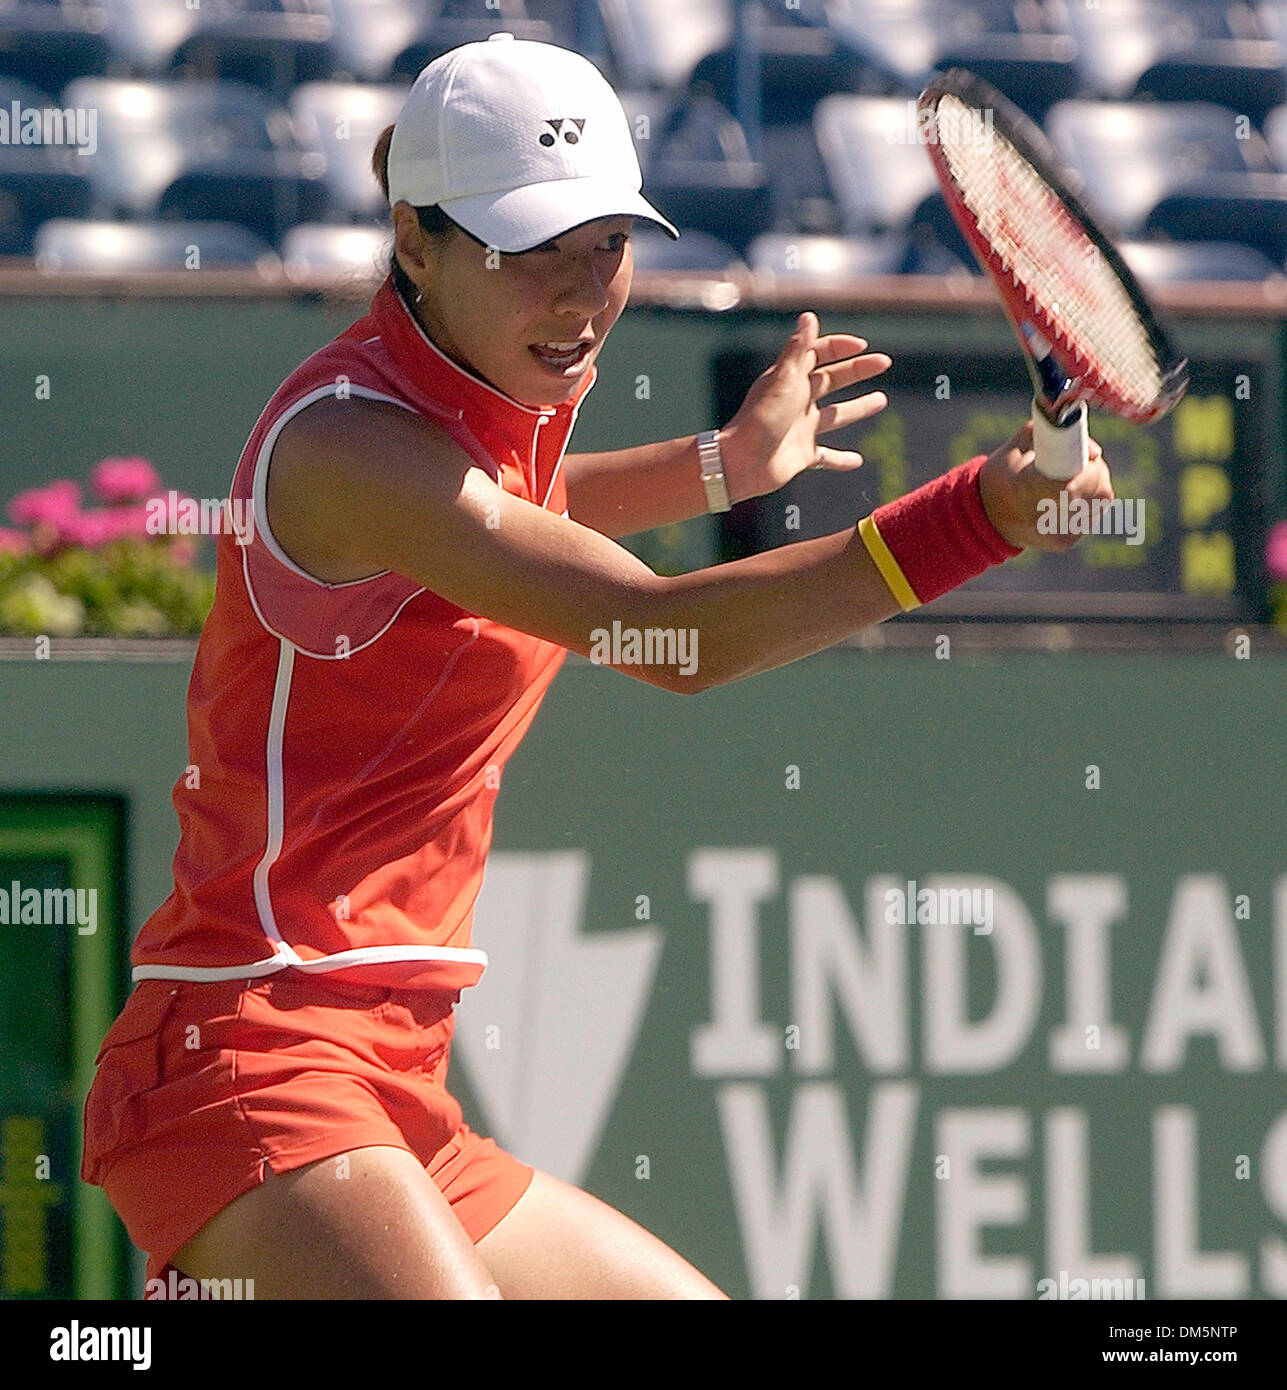 March 11, 2005; Indian Wells, CA, USA; WTA tennis pro SHINOBU ASAGOE during  a match at the 2005 Pacific Life Open at the Indian Wells Tennis Garden. Stock Photo